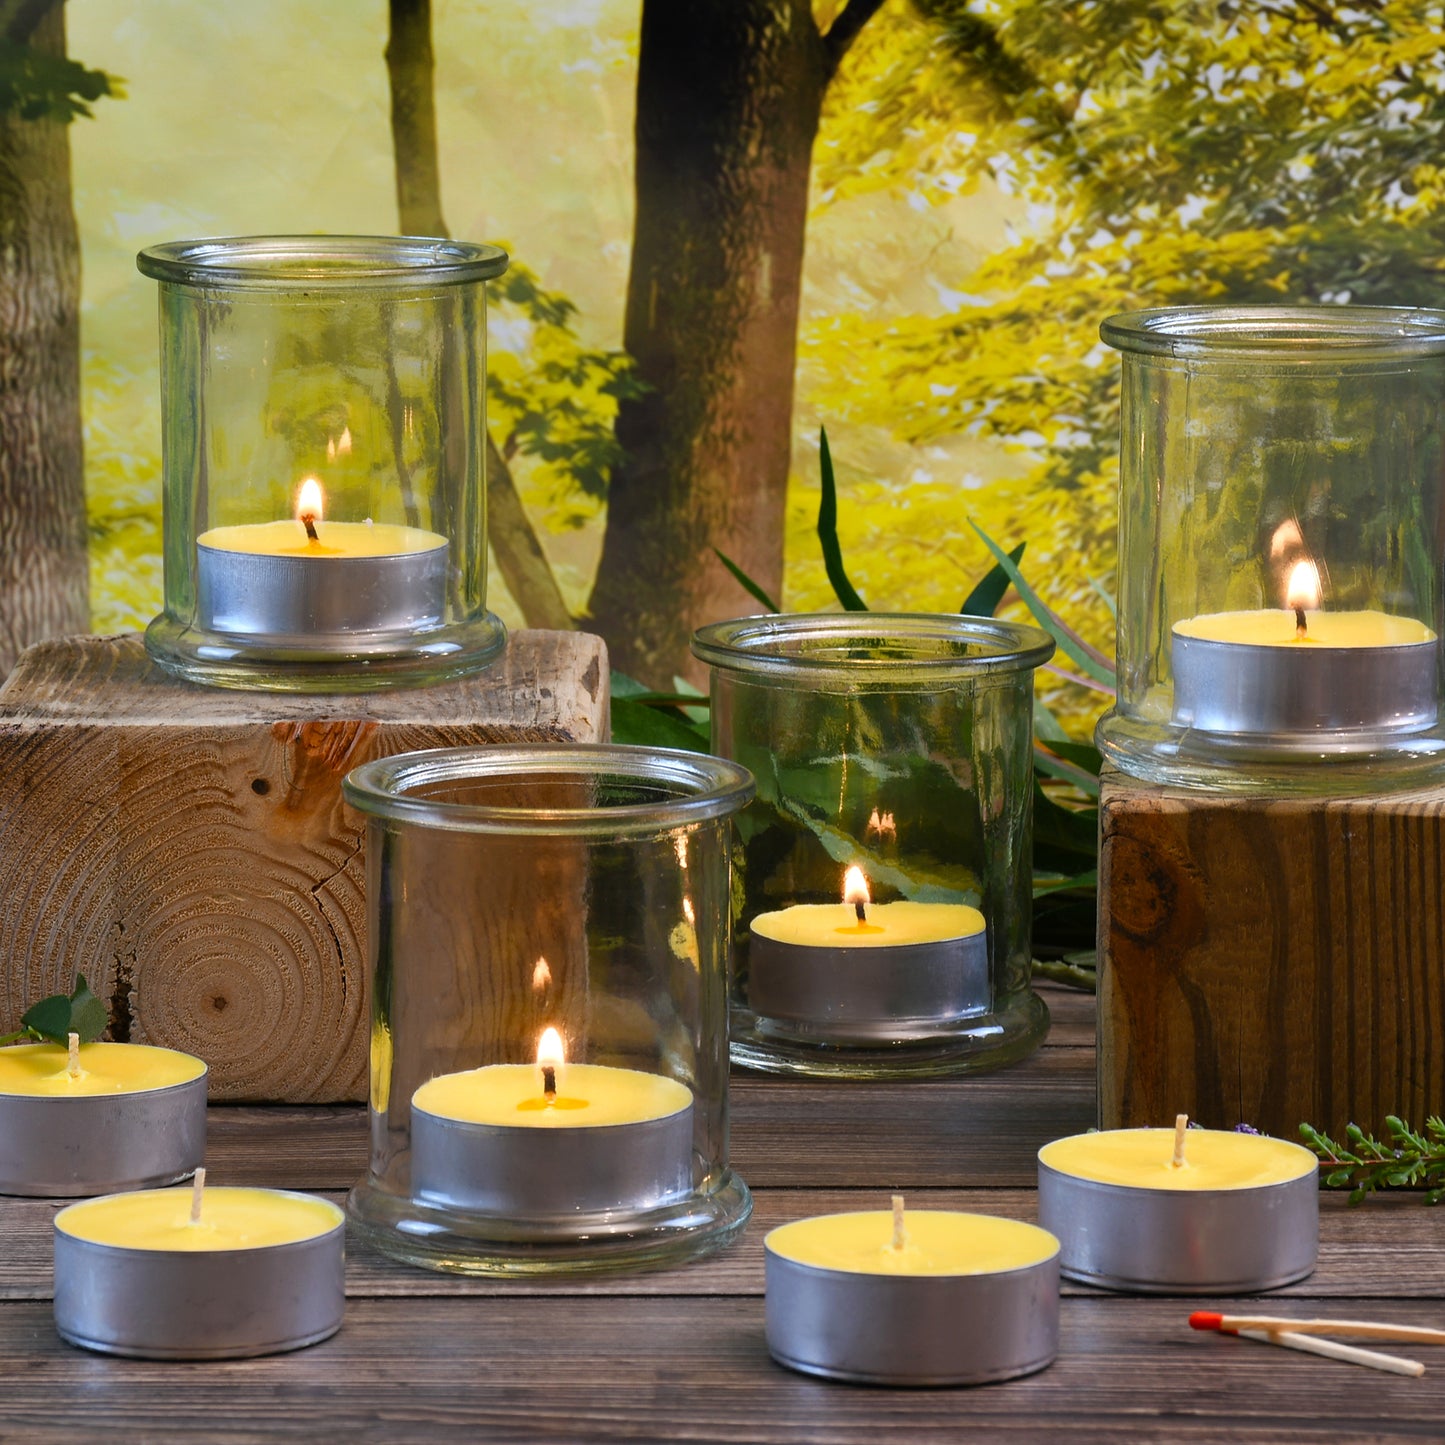 Extra Large Citronella Tea Light Candles - 12 Count